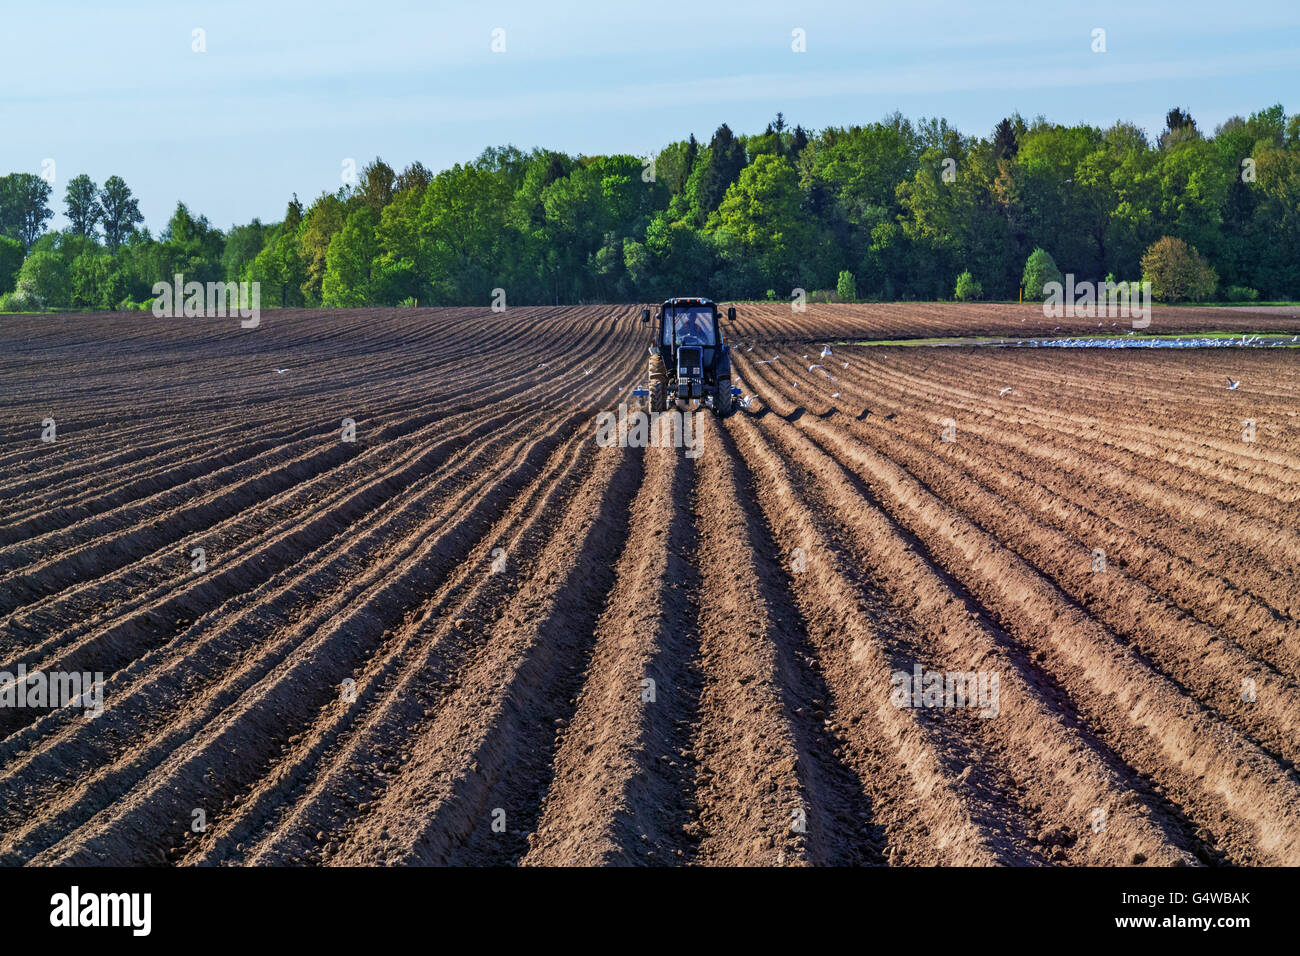 The peasant works at an agricultural field at tractor.Tractor with a seeder with escort white birds. Stock Photo